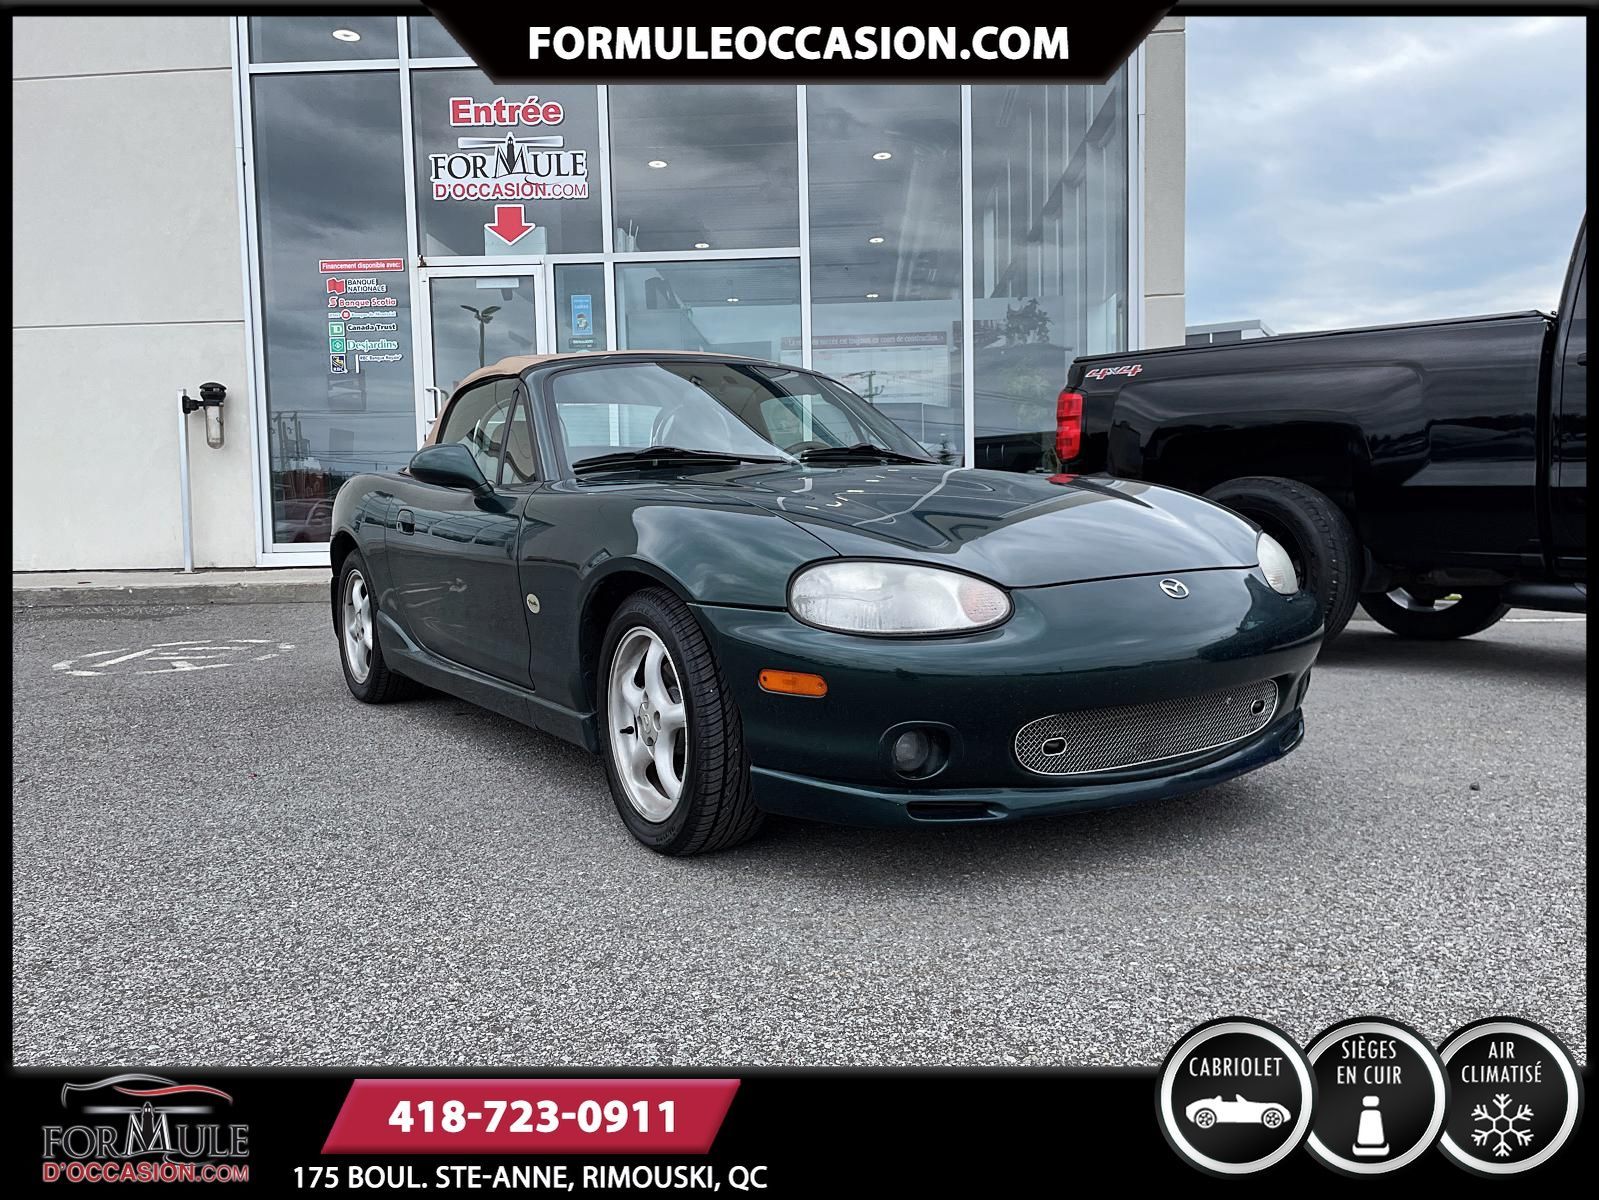 At $9,995, Is This 2000 Mazda MX-5 Miata an Acceptable Answer?